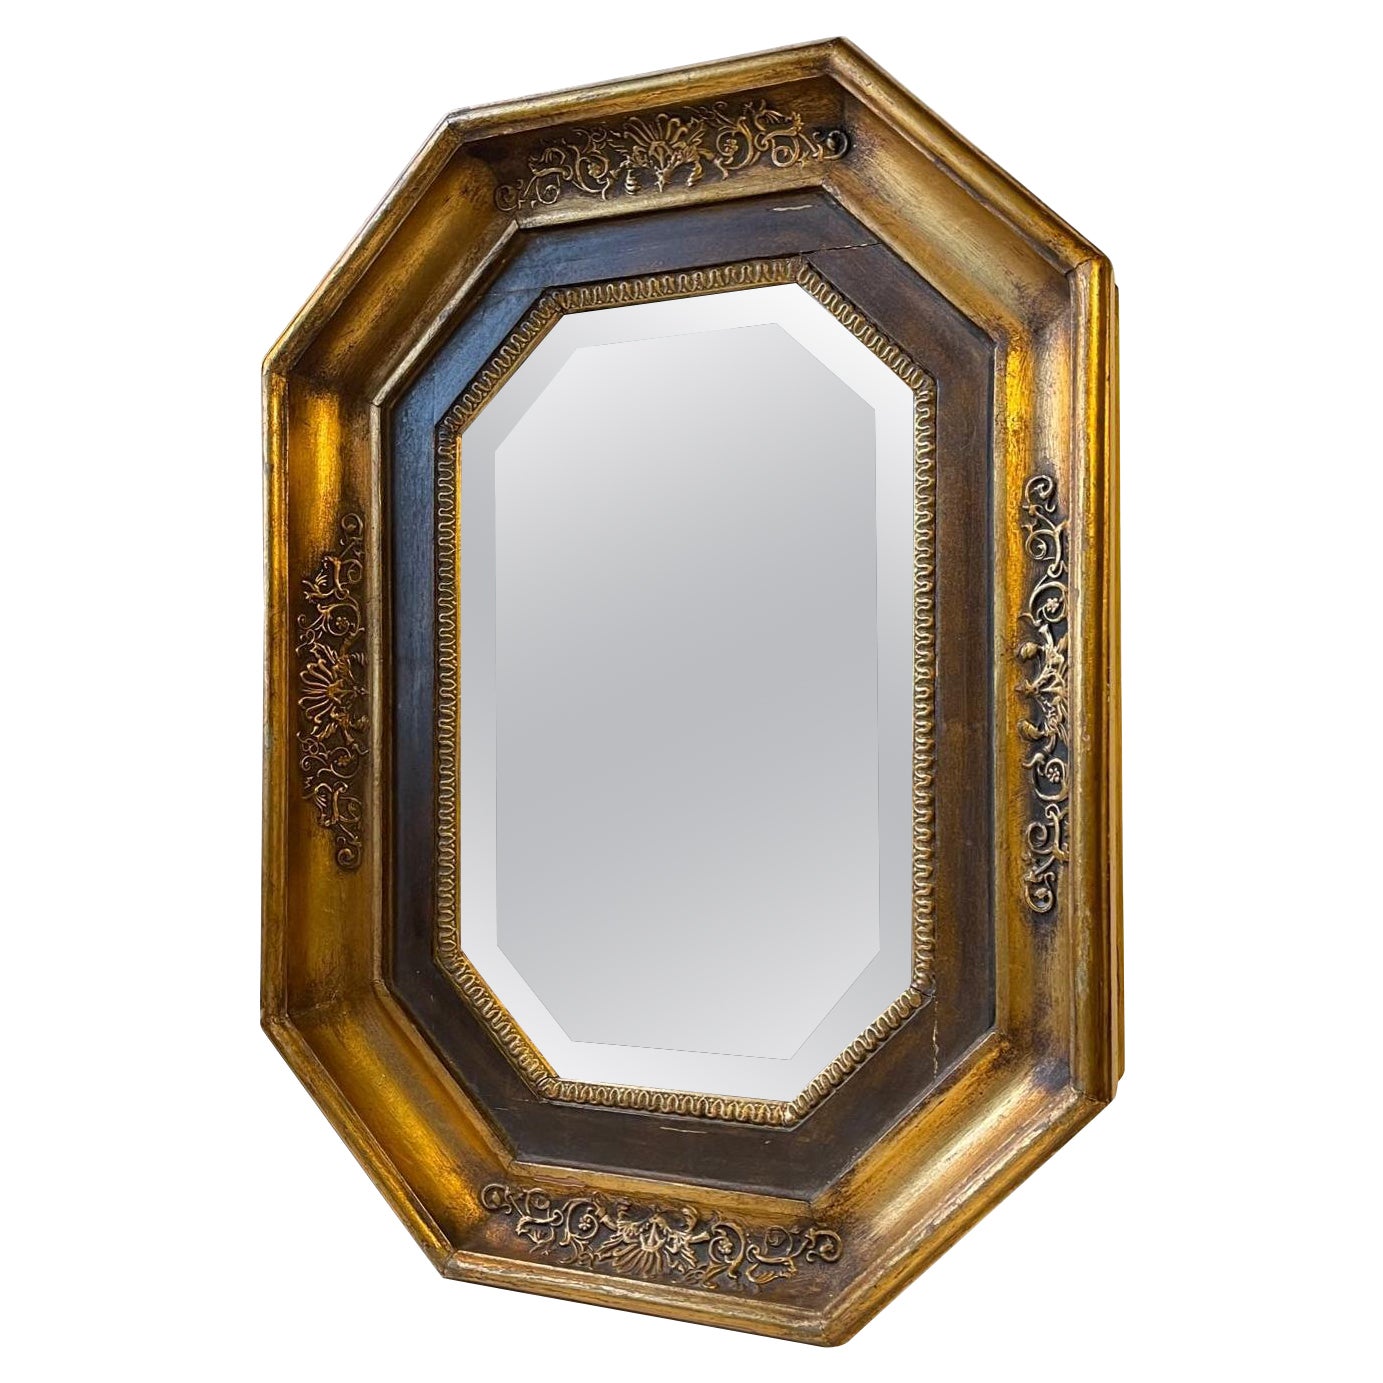 Antique Octagonal Wall Mirror in Gilded Wood, 19th Century Scandinavia For Sale